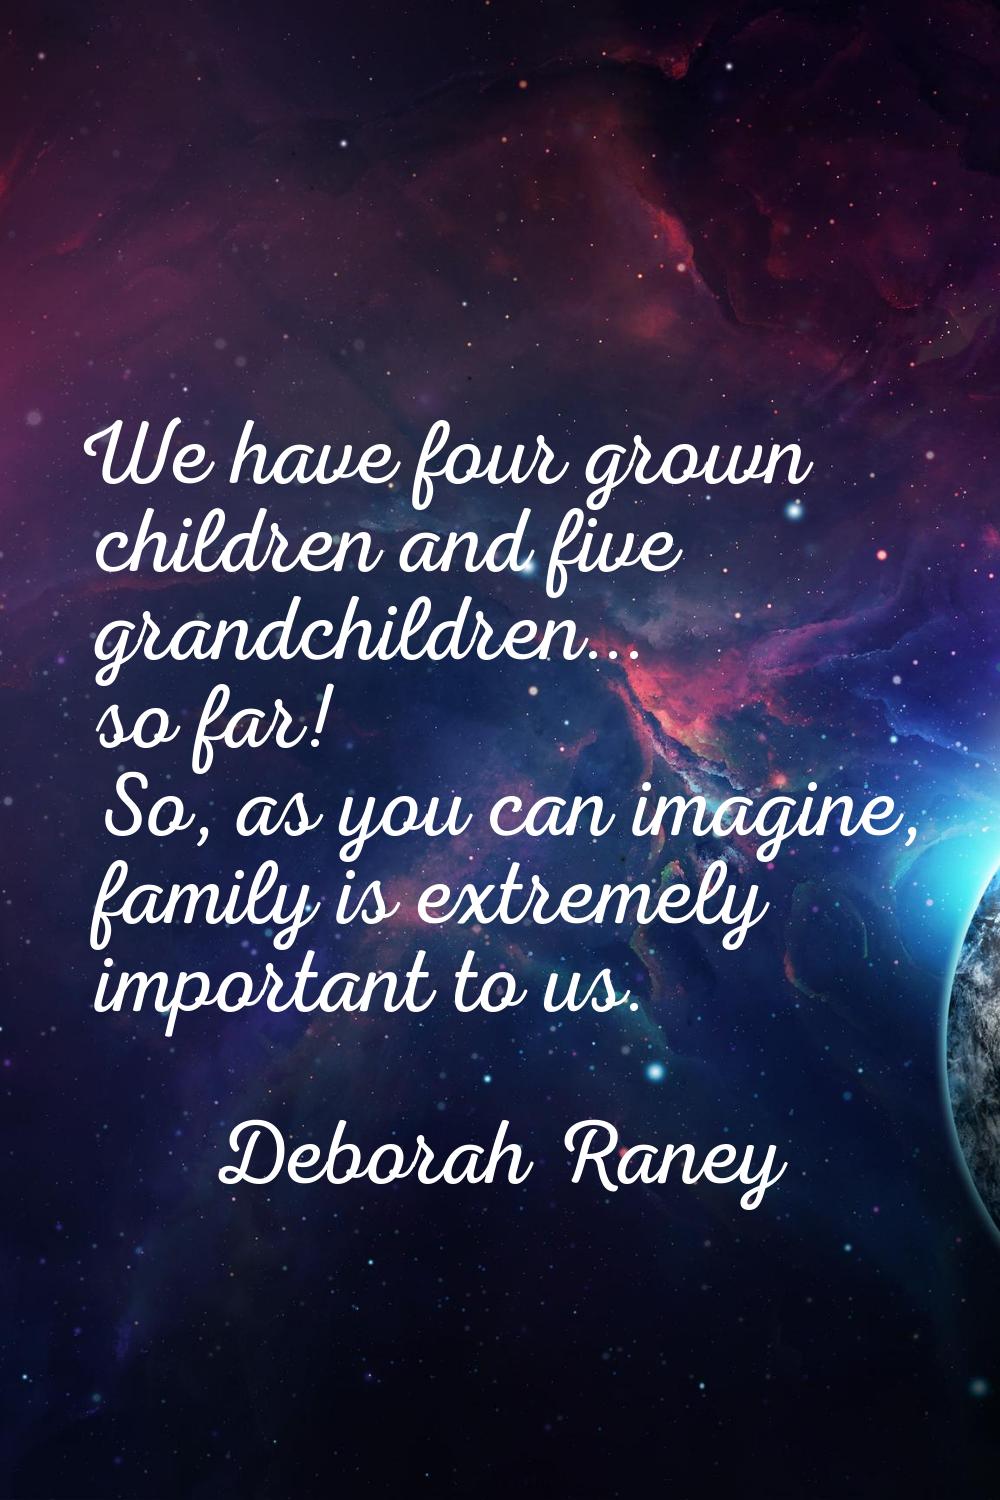 We have four grown children and five grandchildren... so far! So, as you can imagine, family is ext